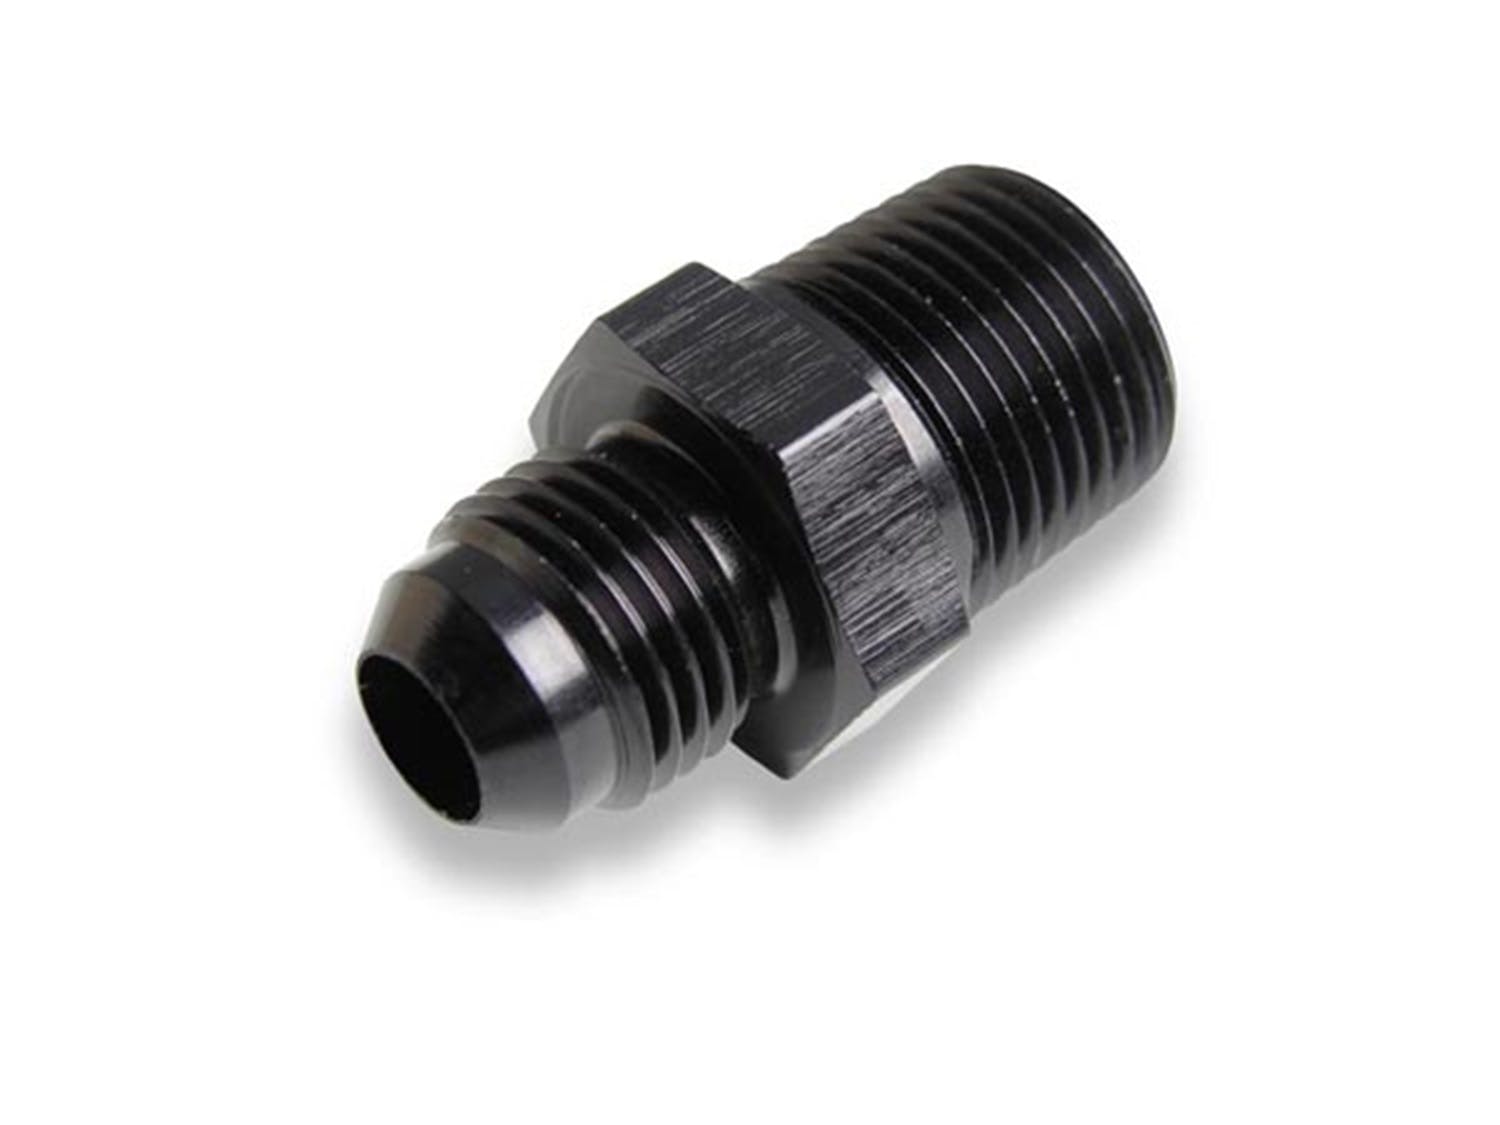 NOS 17969NOS -4AN TO 1/4 NPT ADAPTER, STRAIGHT, BLACK